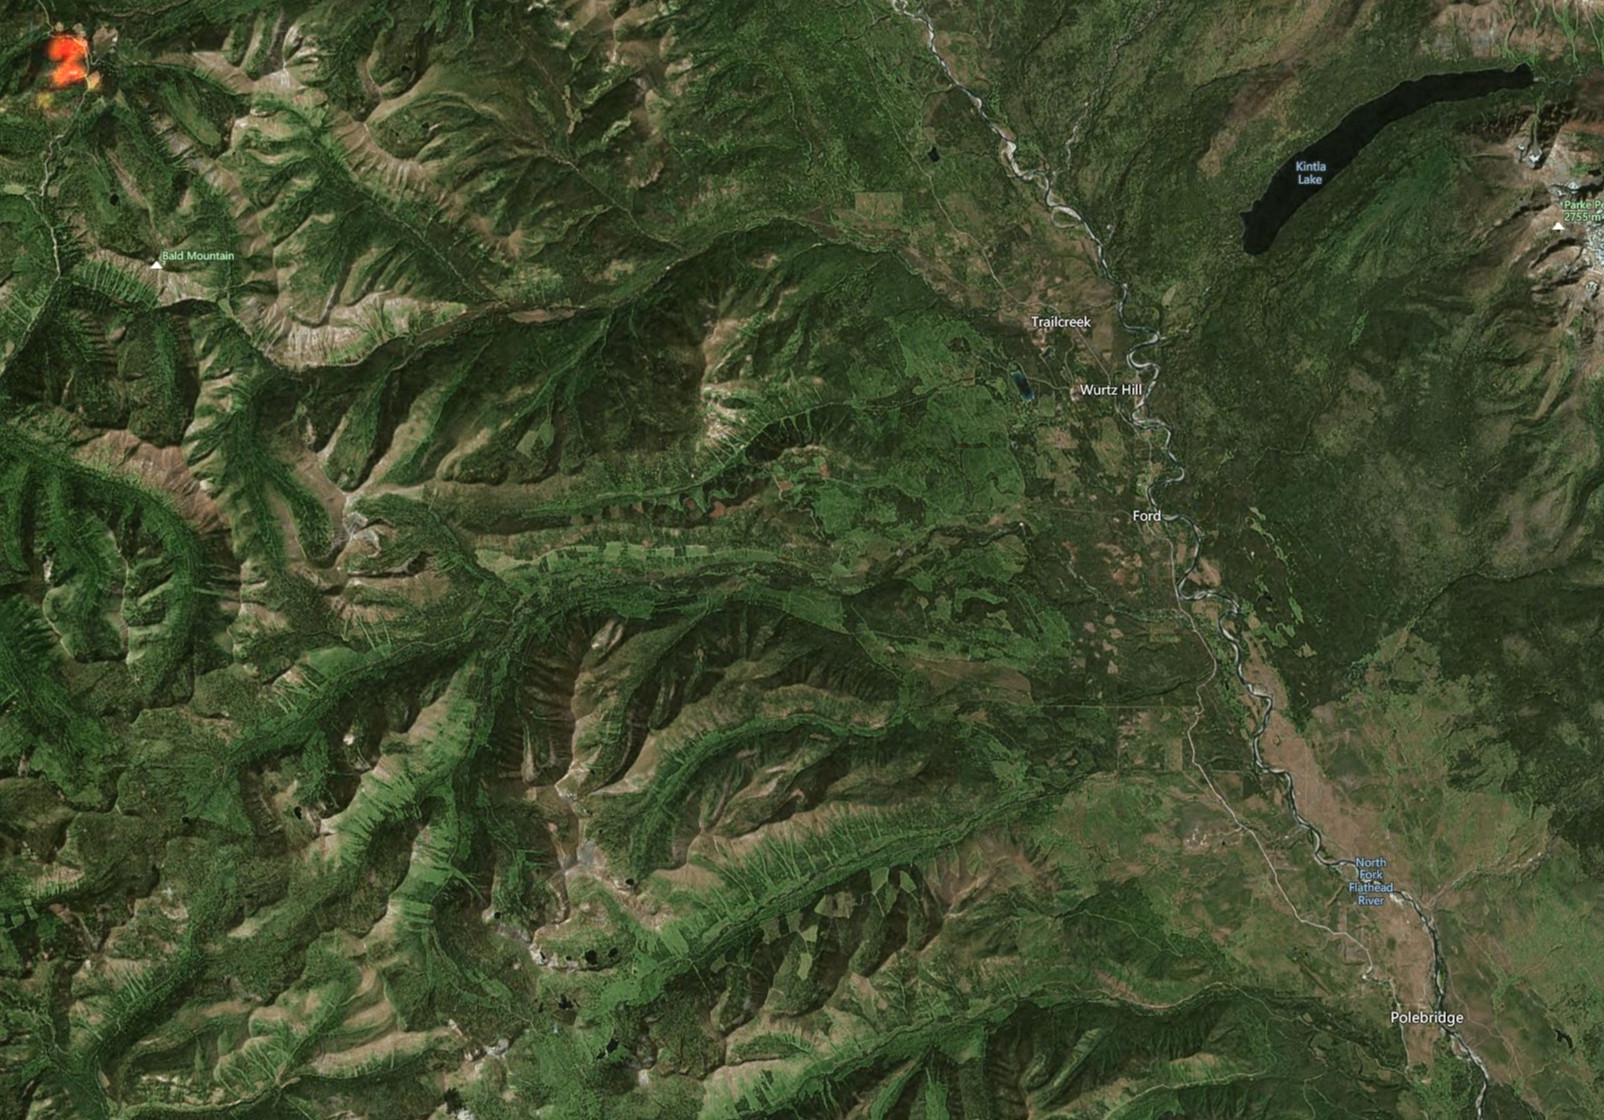 Weasel Fire Location, 1 Aug 22